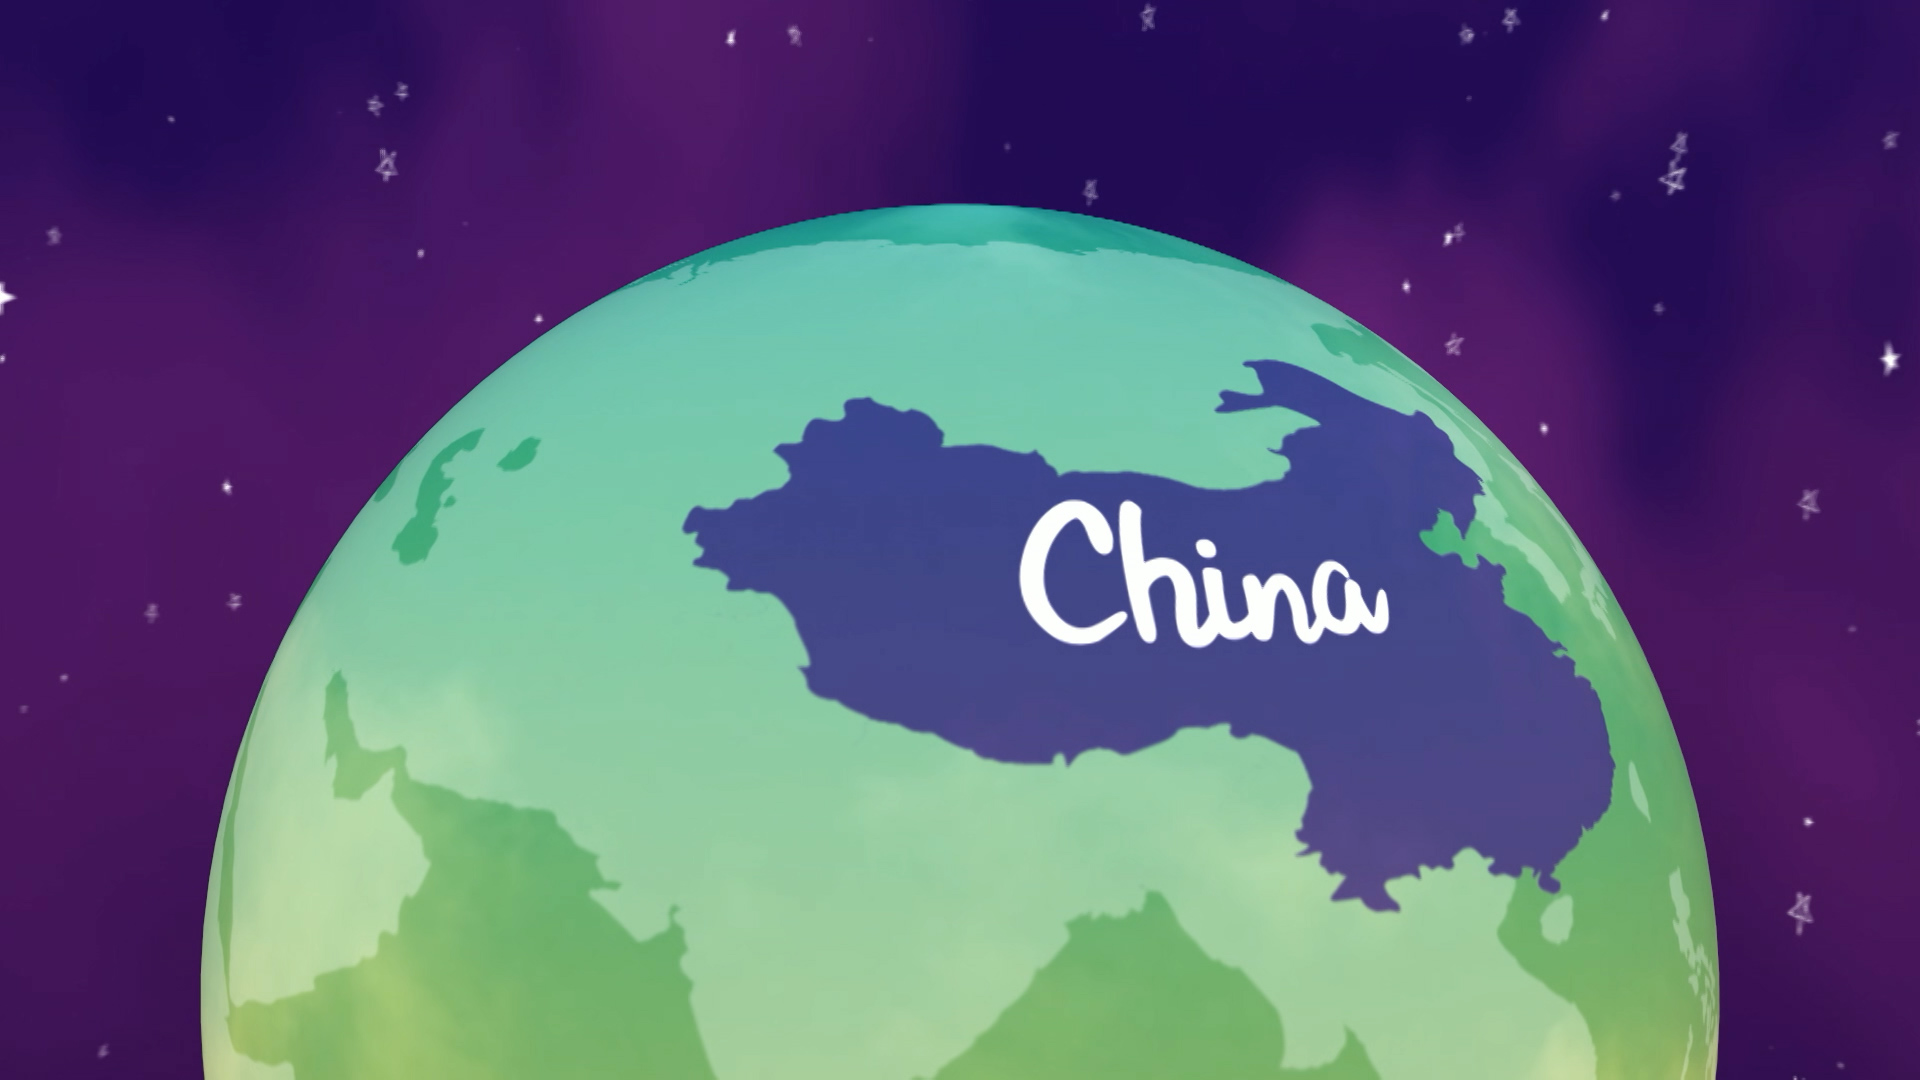 My Life: Adopted from China - animation of world and country china